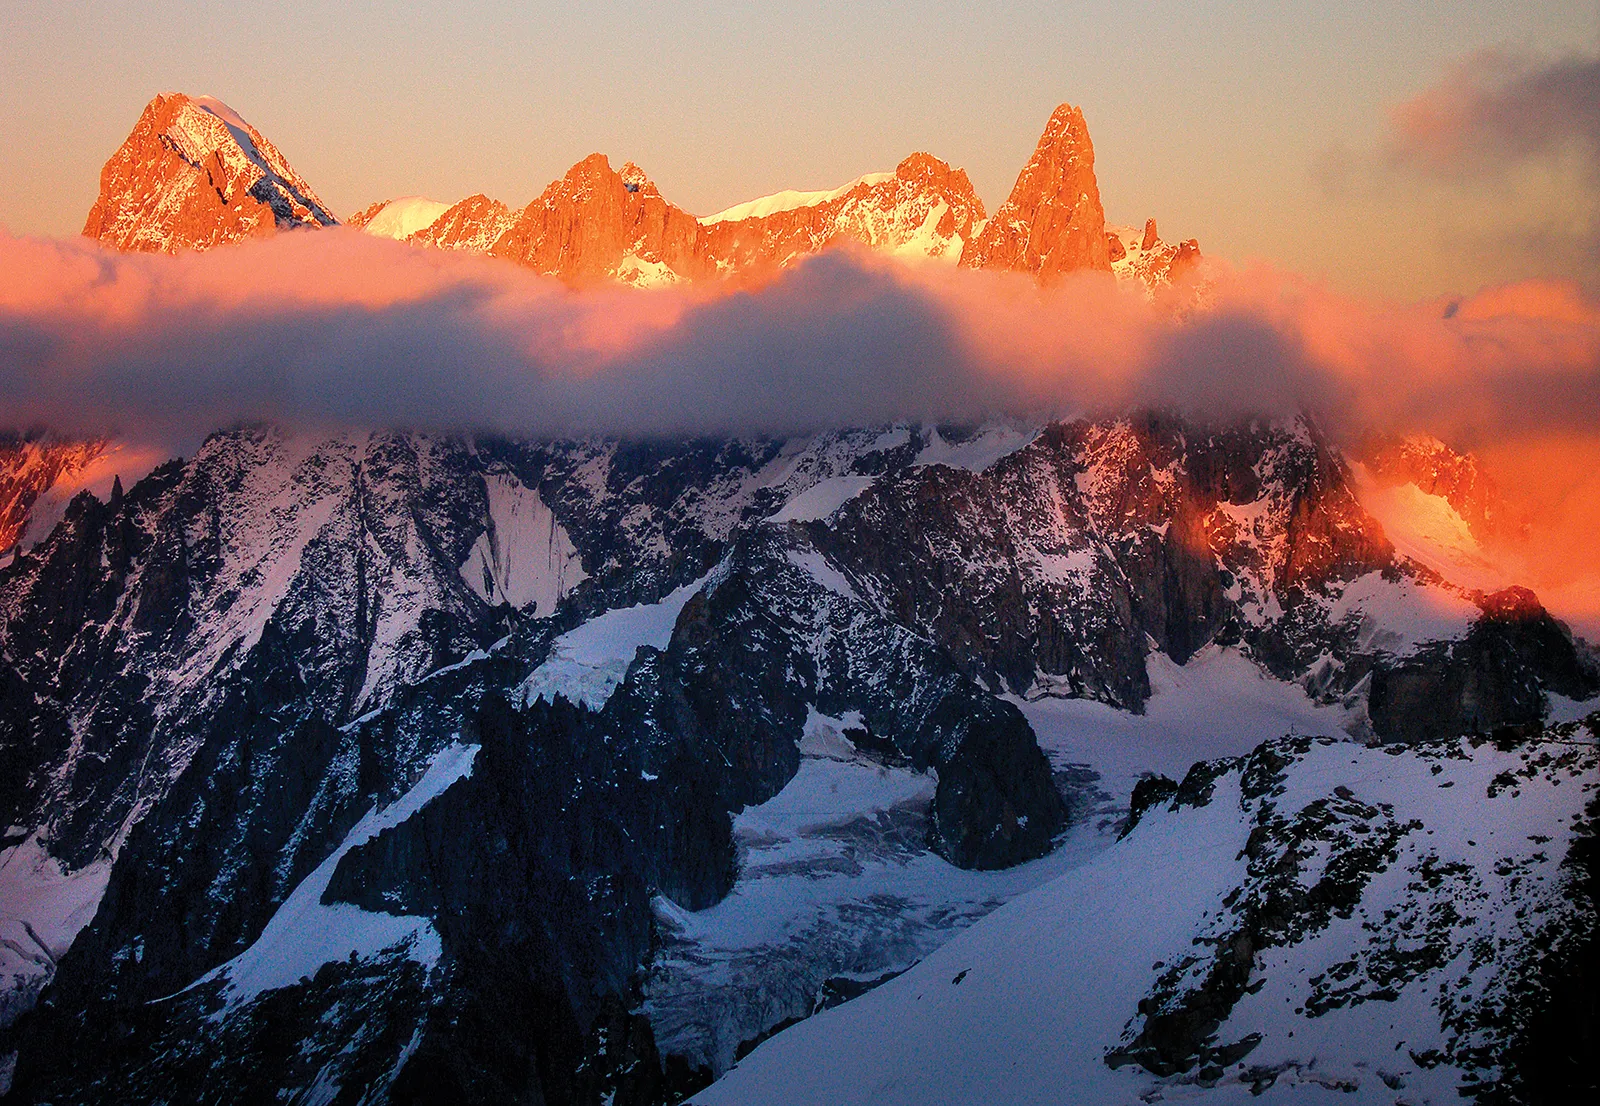 Mont Blanc, 7th highest mountain in Europe